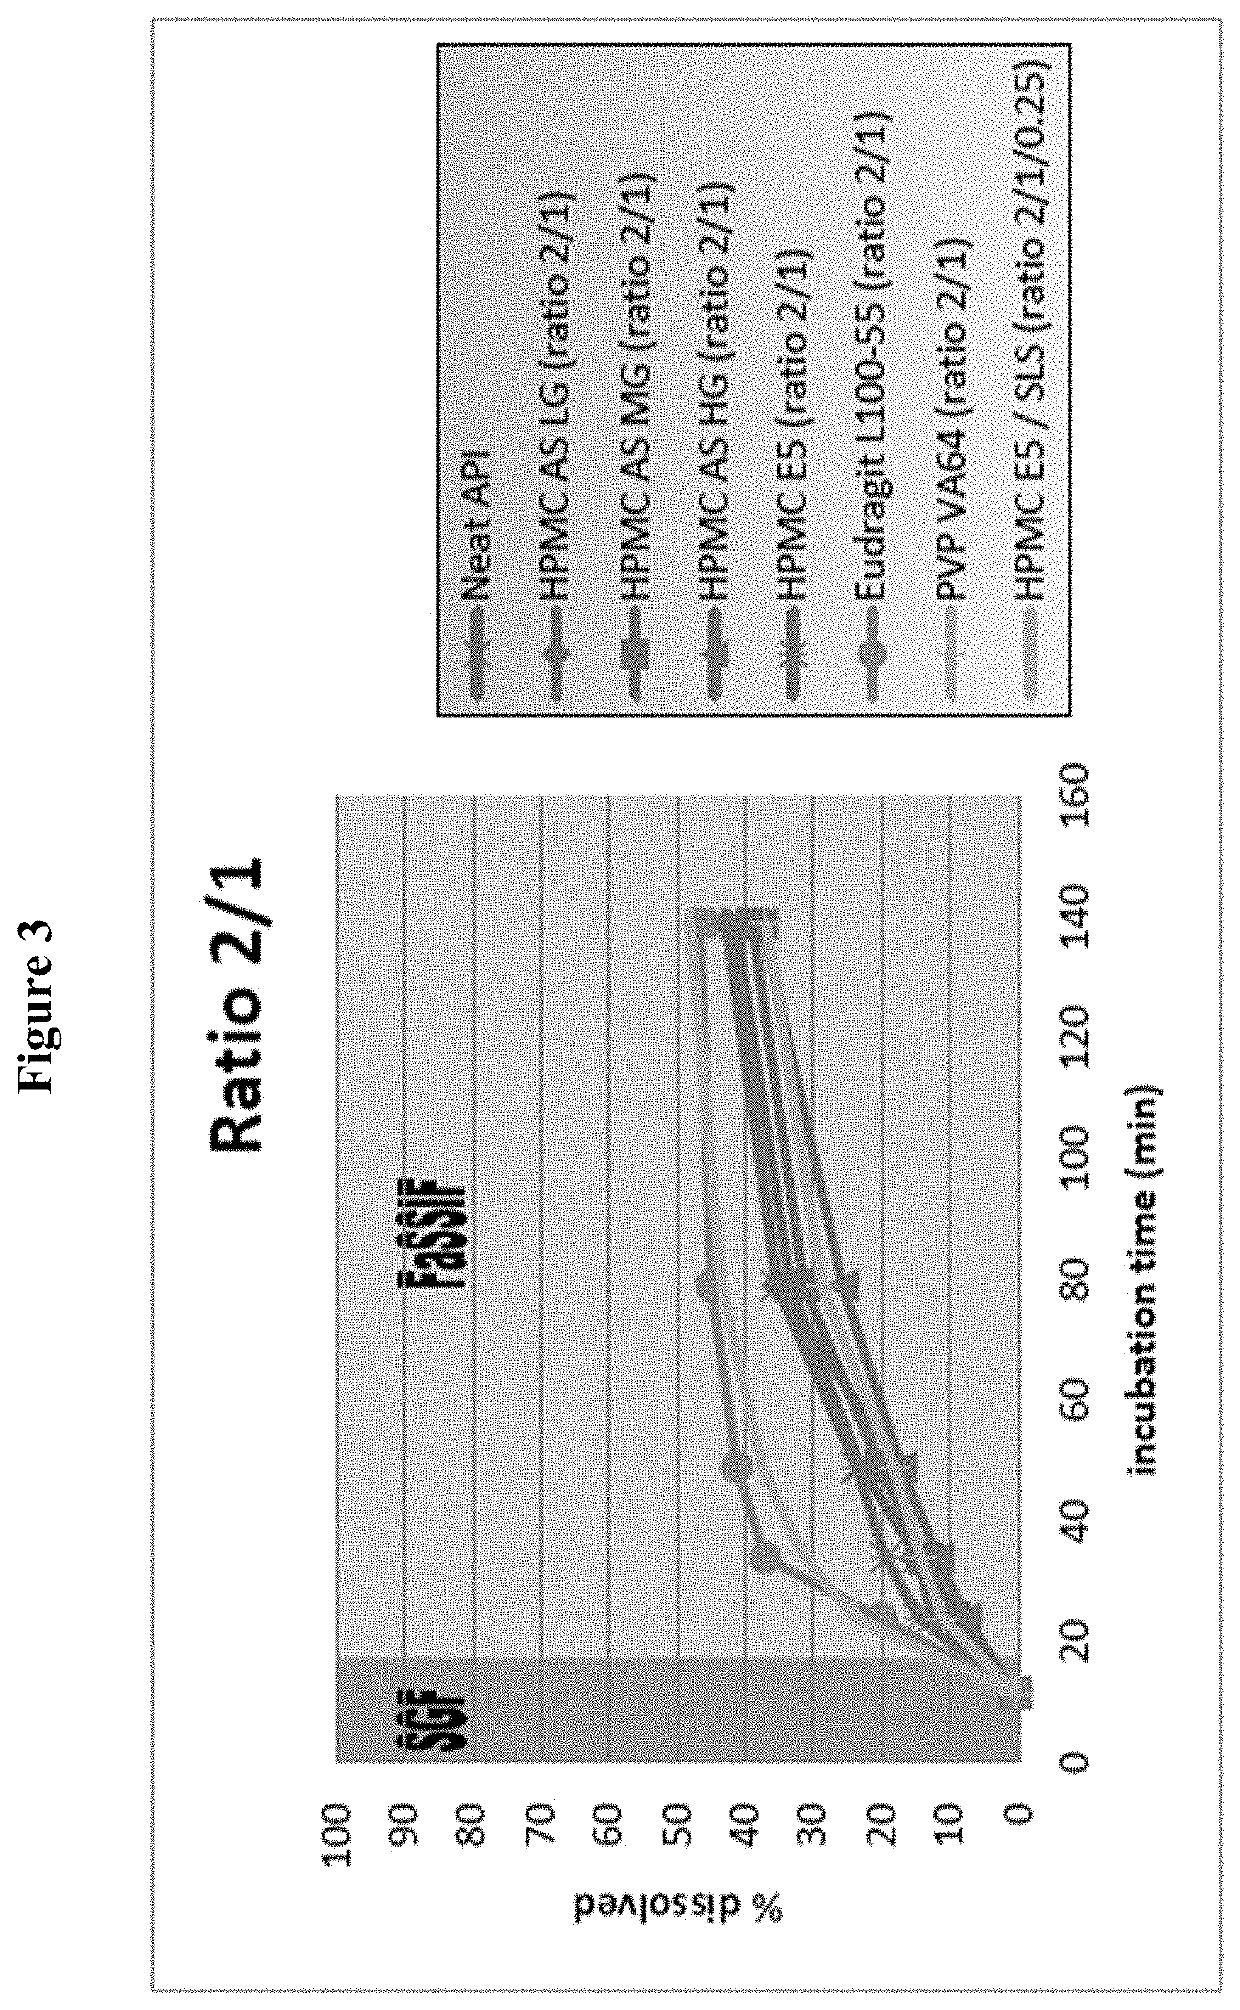 Amorphous form of a malt1 inhibitor and formulations thereof